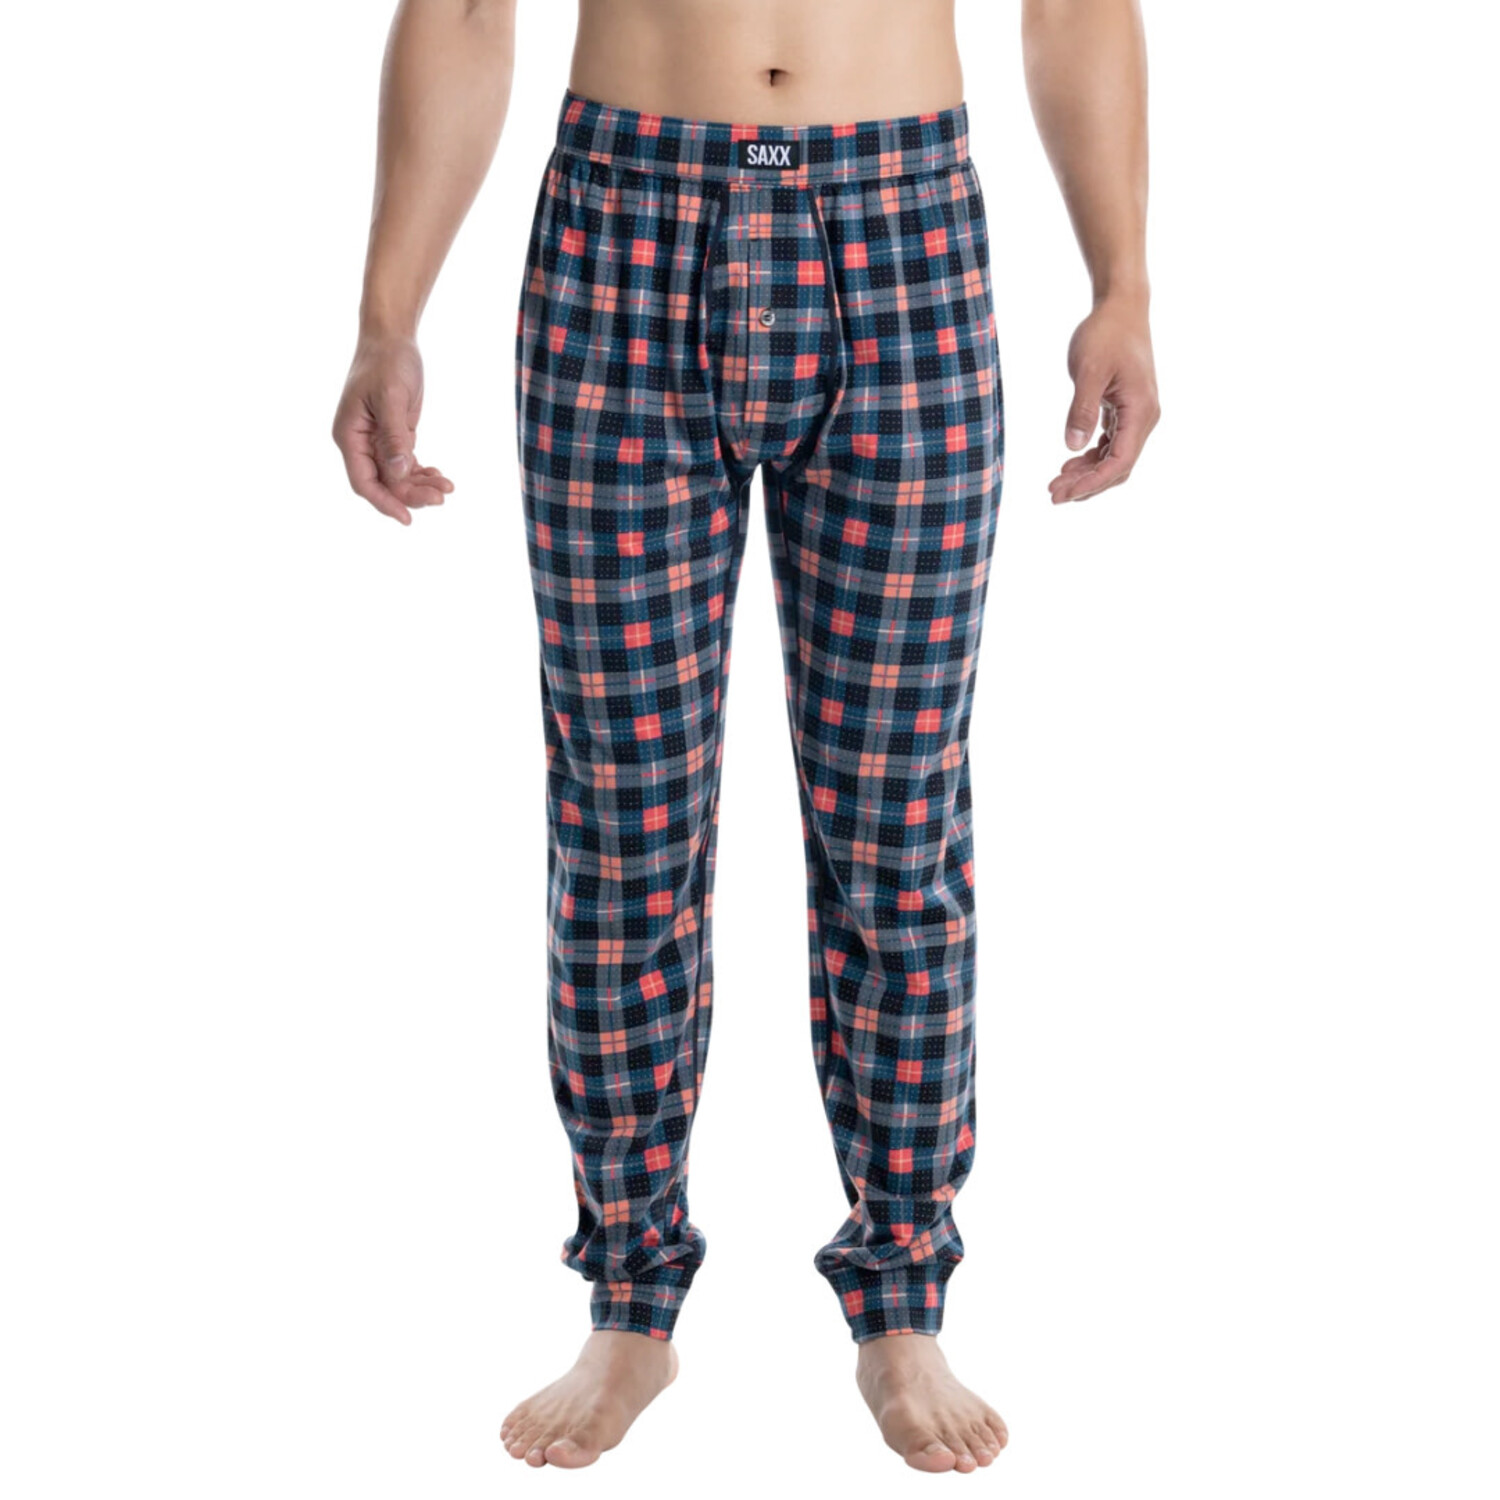 Cooling pajama pants for women